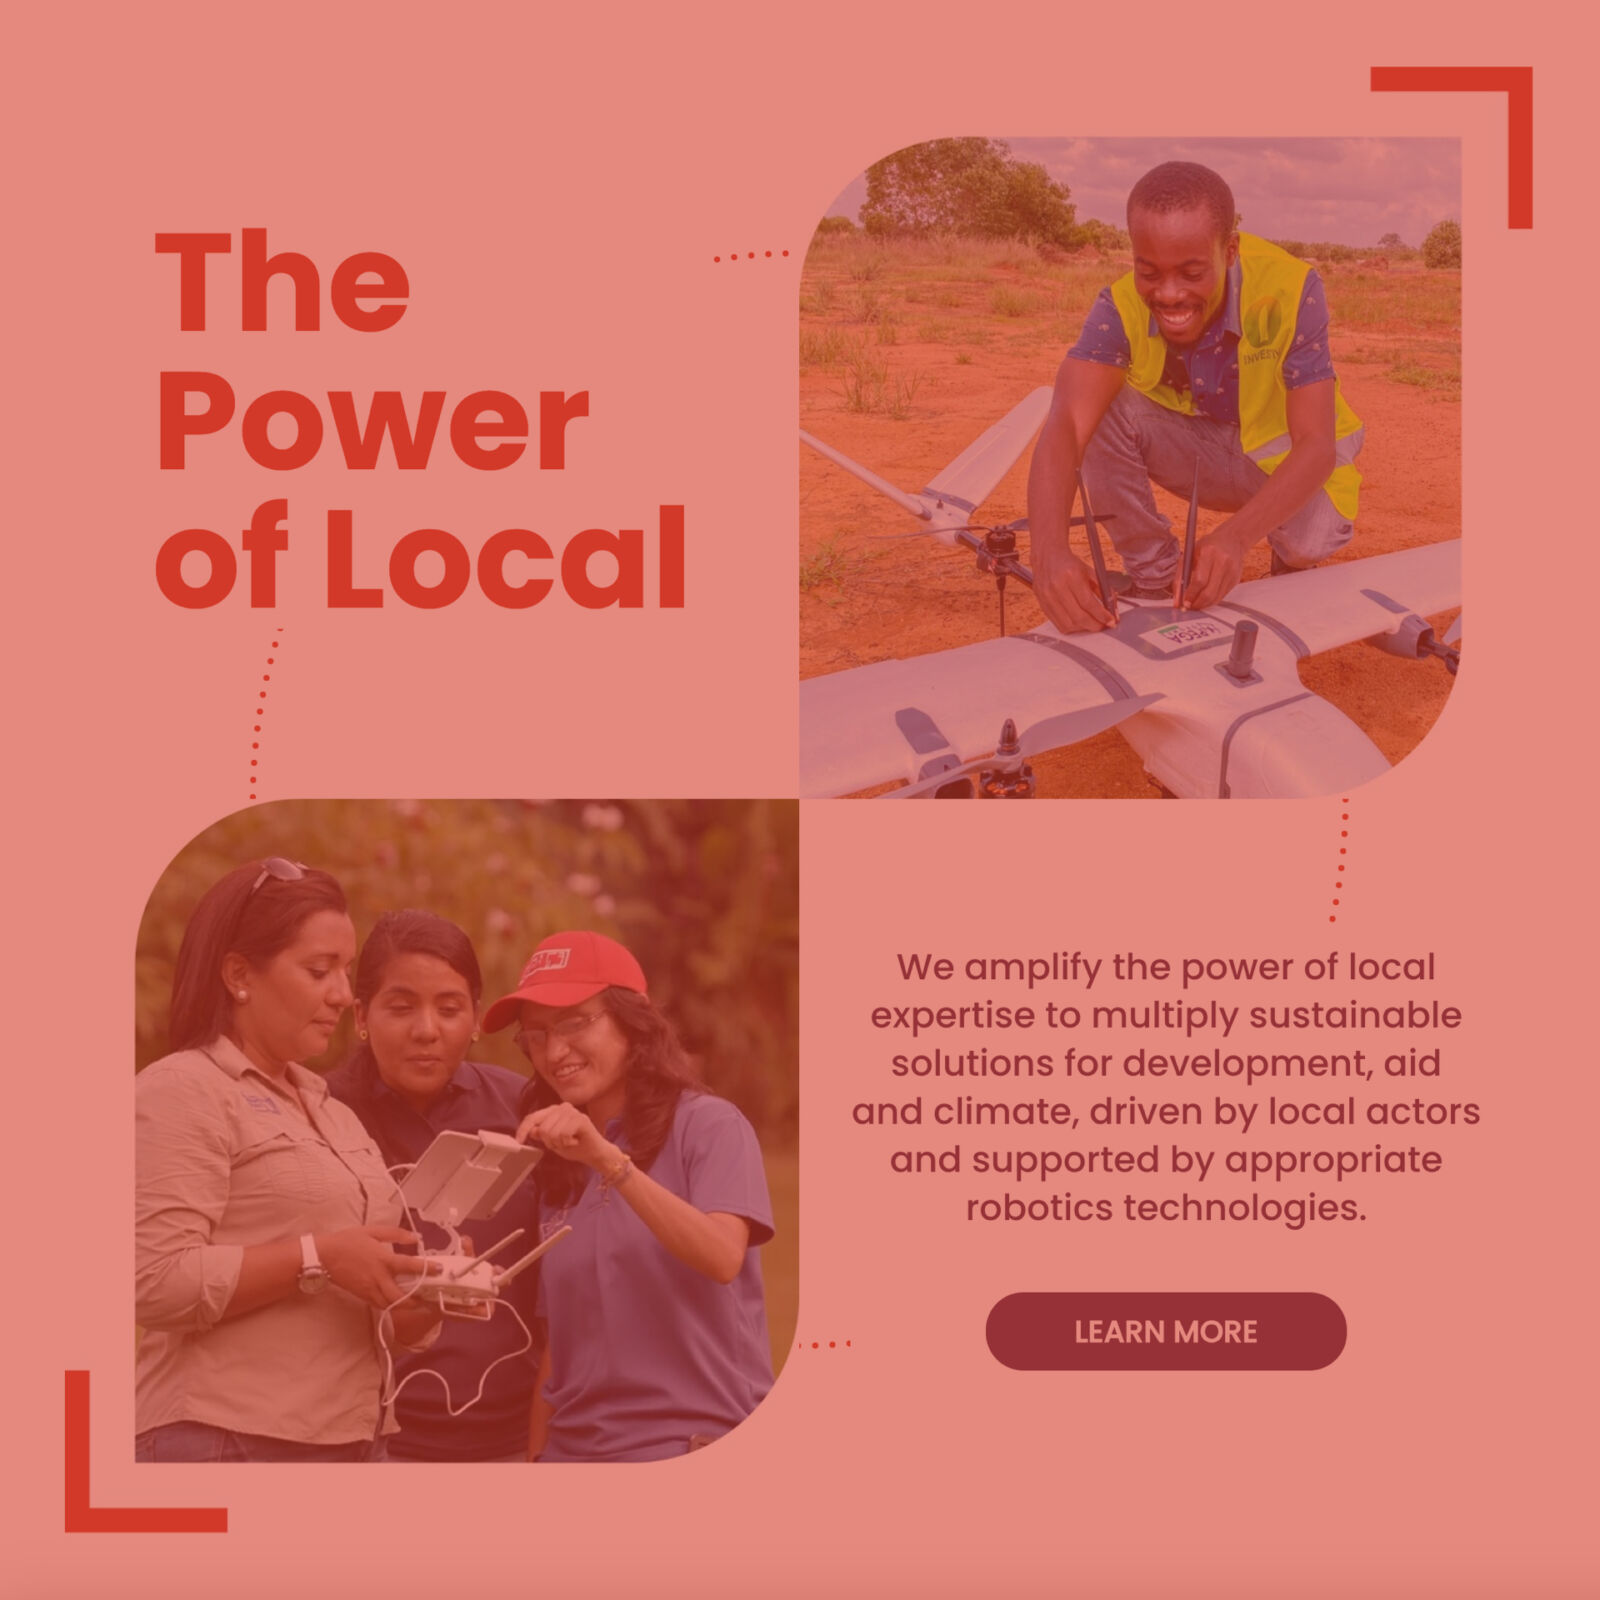 WeRobotics hero from new website highlighting the "Power of Local" with a tinted overlay using their brand red.